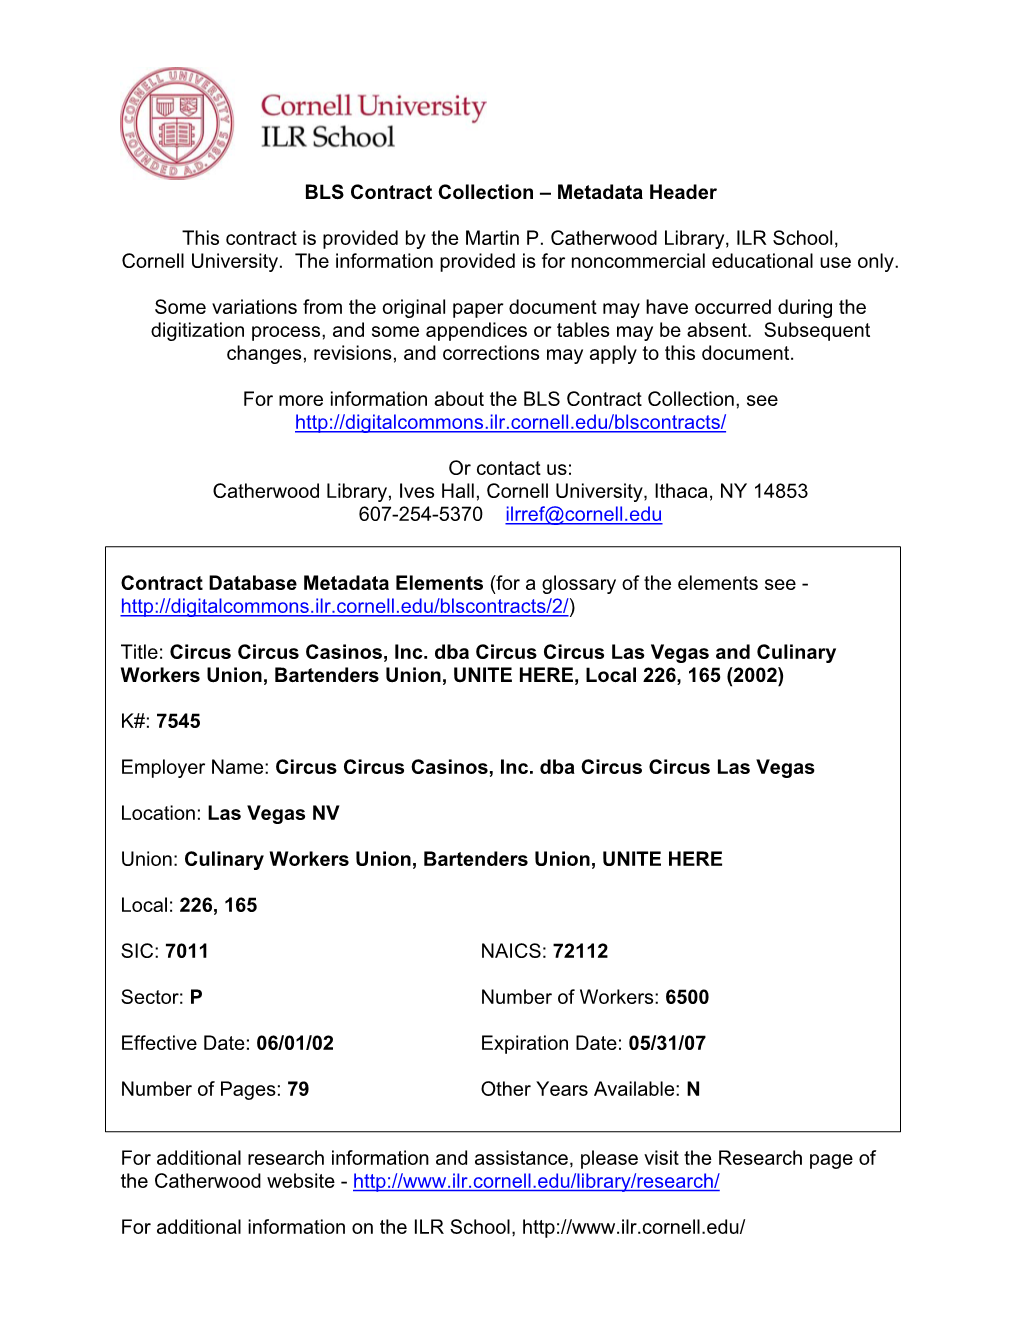 Circus Circus Casinos, Inc., Circus Circus Las Vegas and Culinary Workers Union, Bartenders Union, UNITE HERE, Local 226